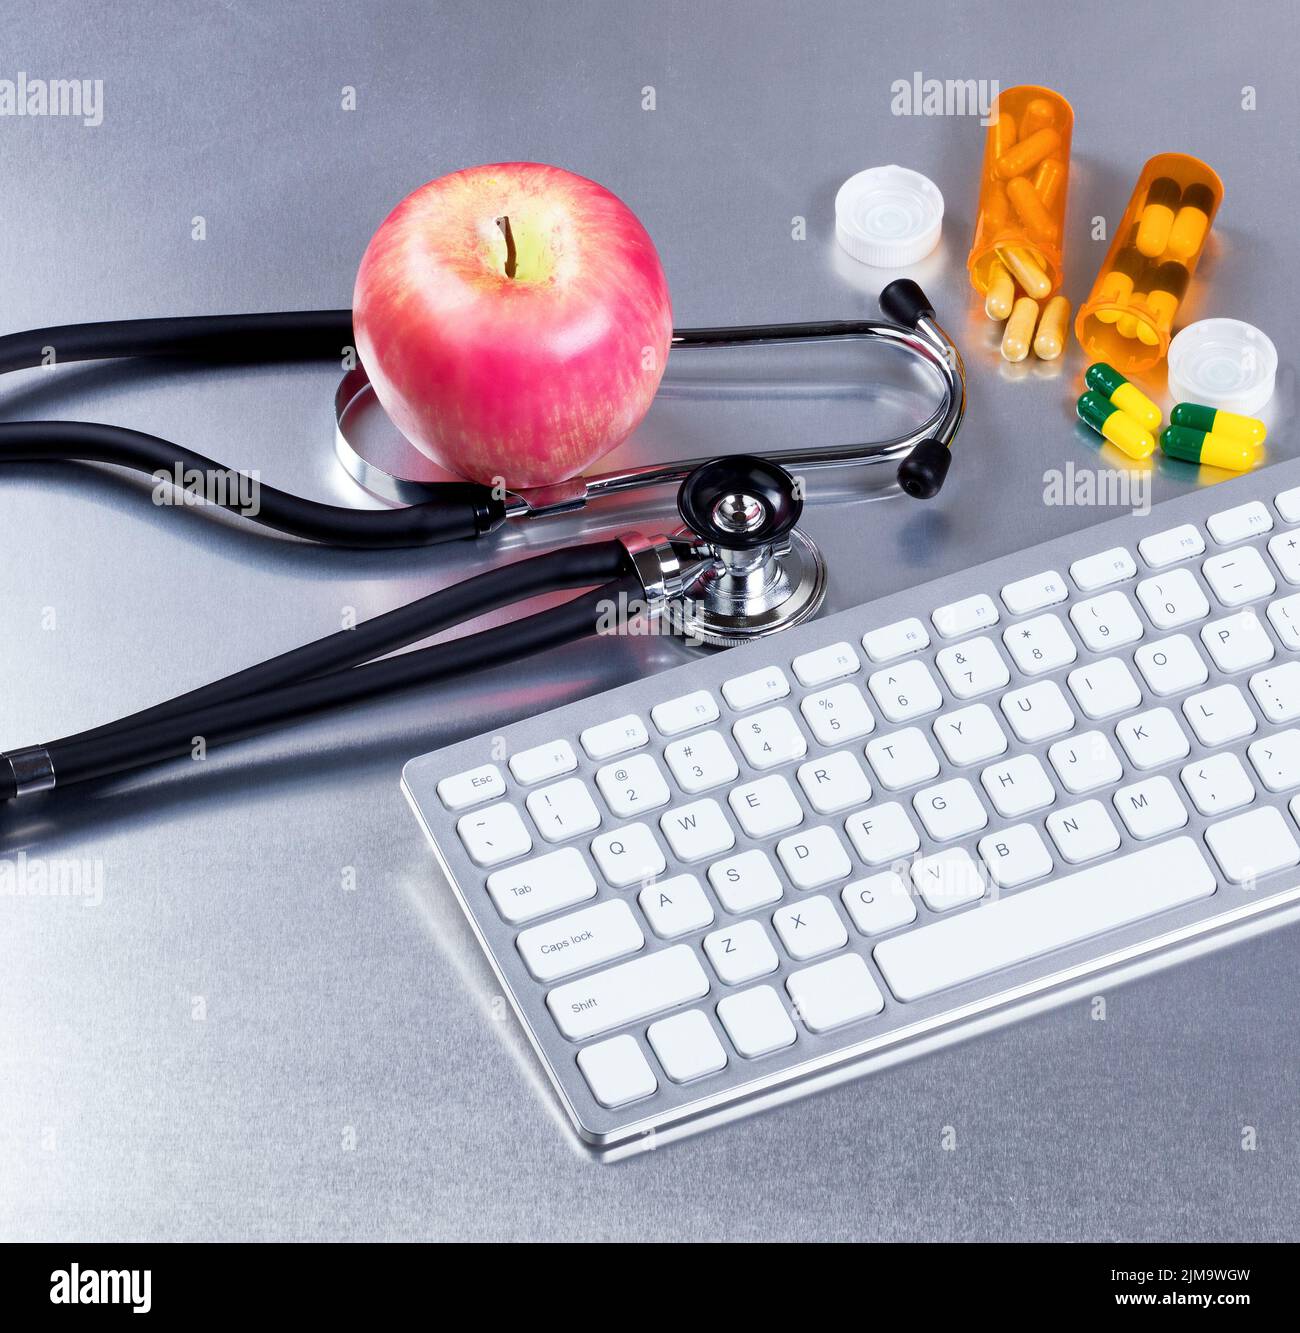 Computer and medical equipment with medicine on stainless steel exam table Stock Photo